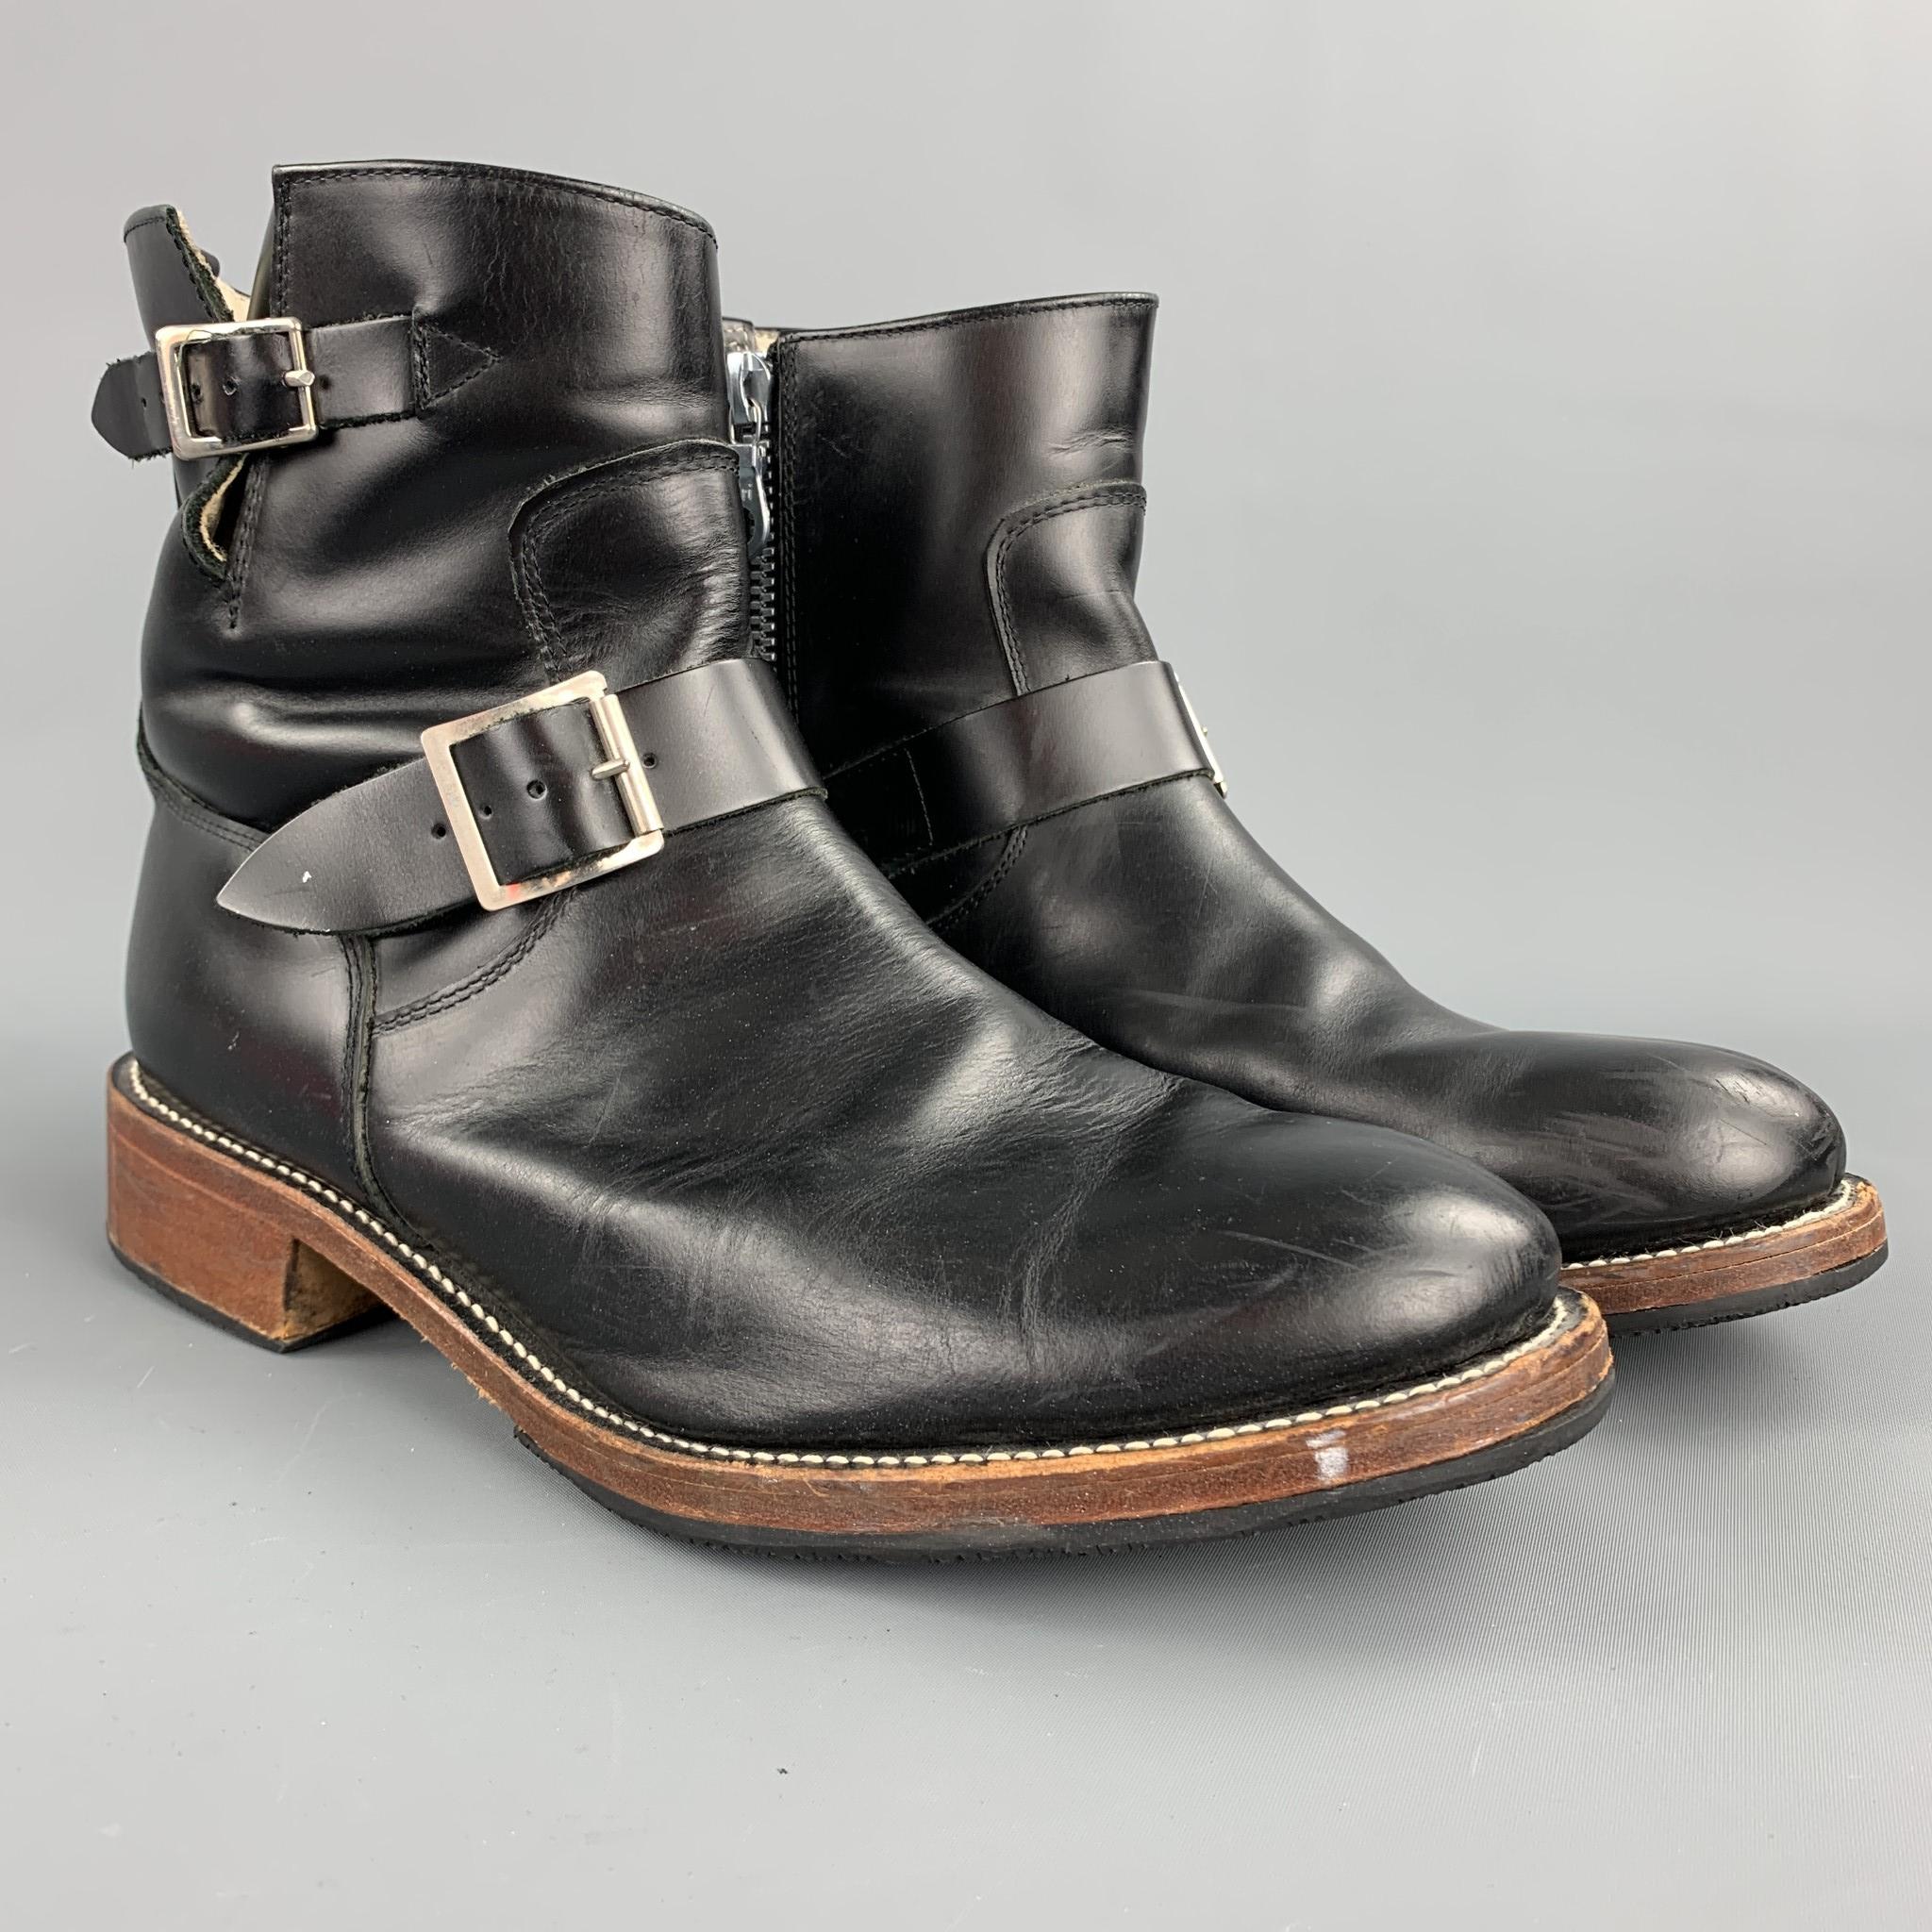 MASTERMIND JAPAN ankle boots comes in a black leather with contrast stitching featuring a belted design, wooden sole, and a side zipper closure. Minor wear.

Good Pre-Owned Condition.
Marked: No size marked

Measurements:

Length: 12 in.
Width: 4.5